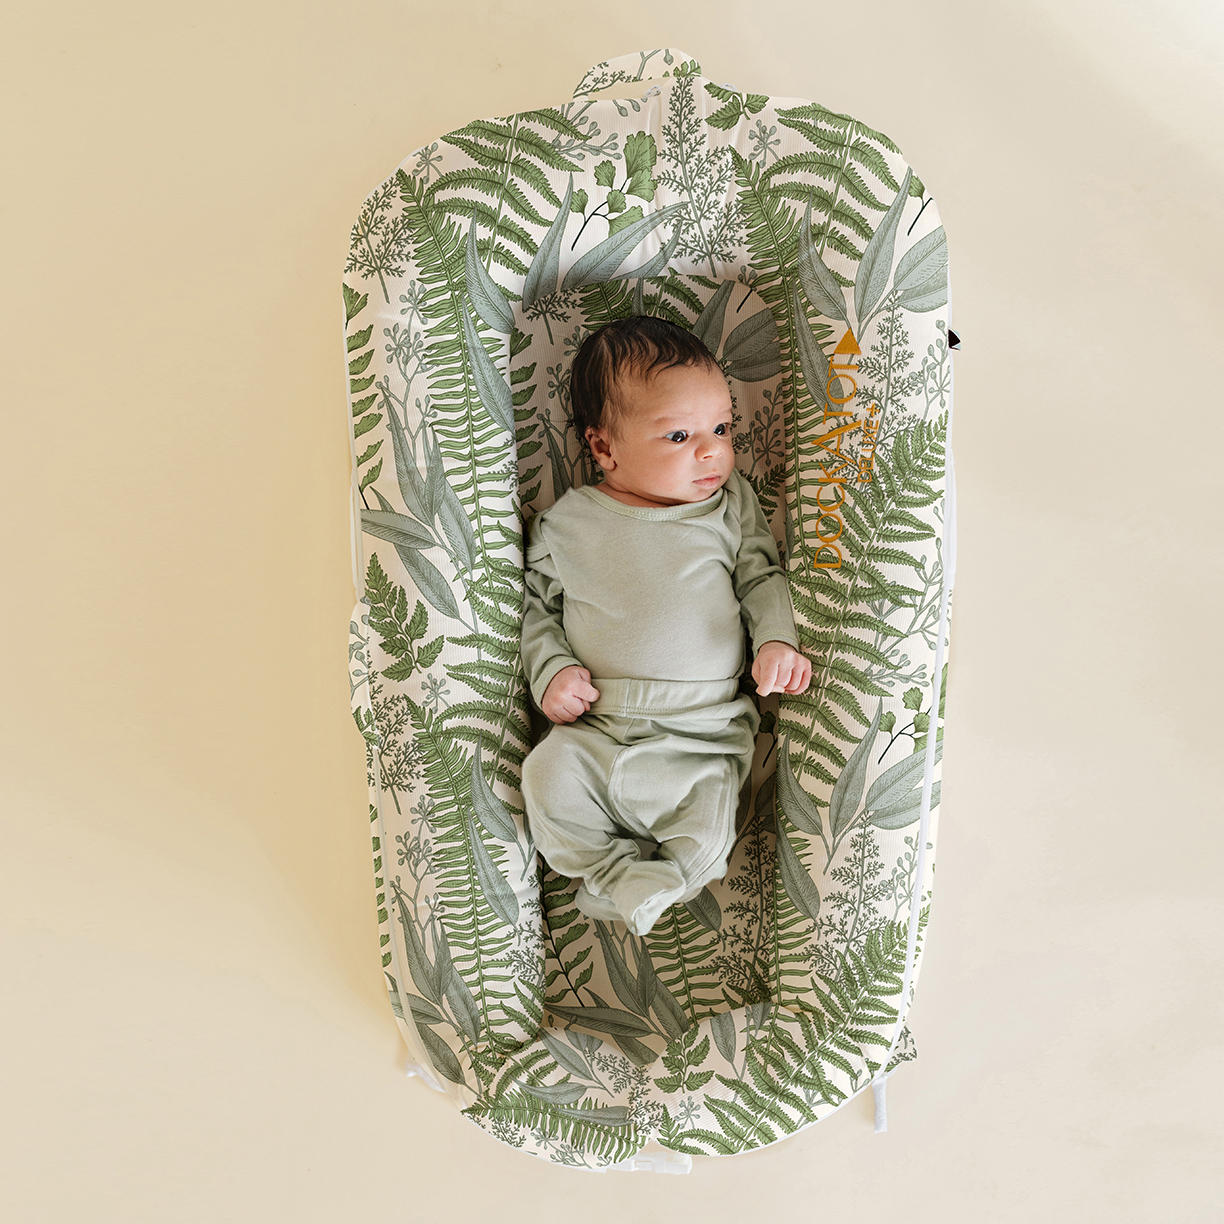 Styles to Welcome Baby Up to 50% Off